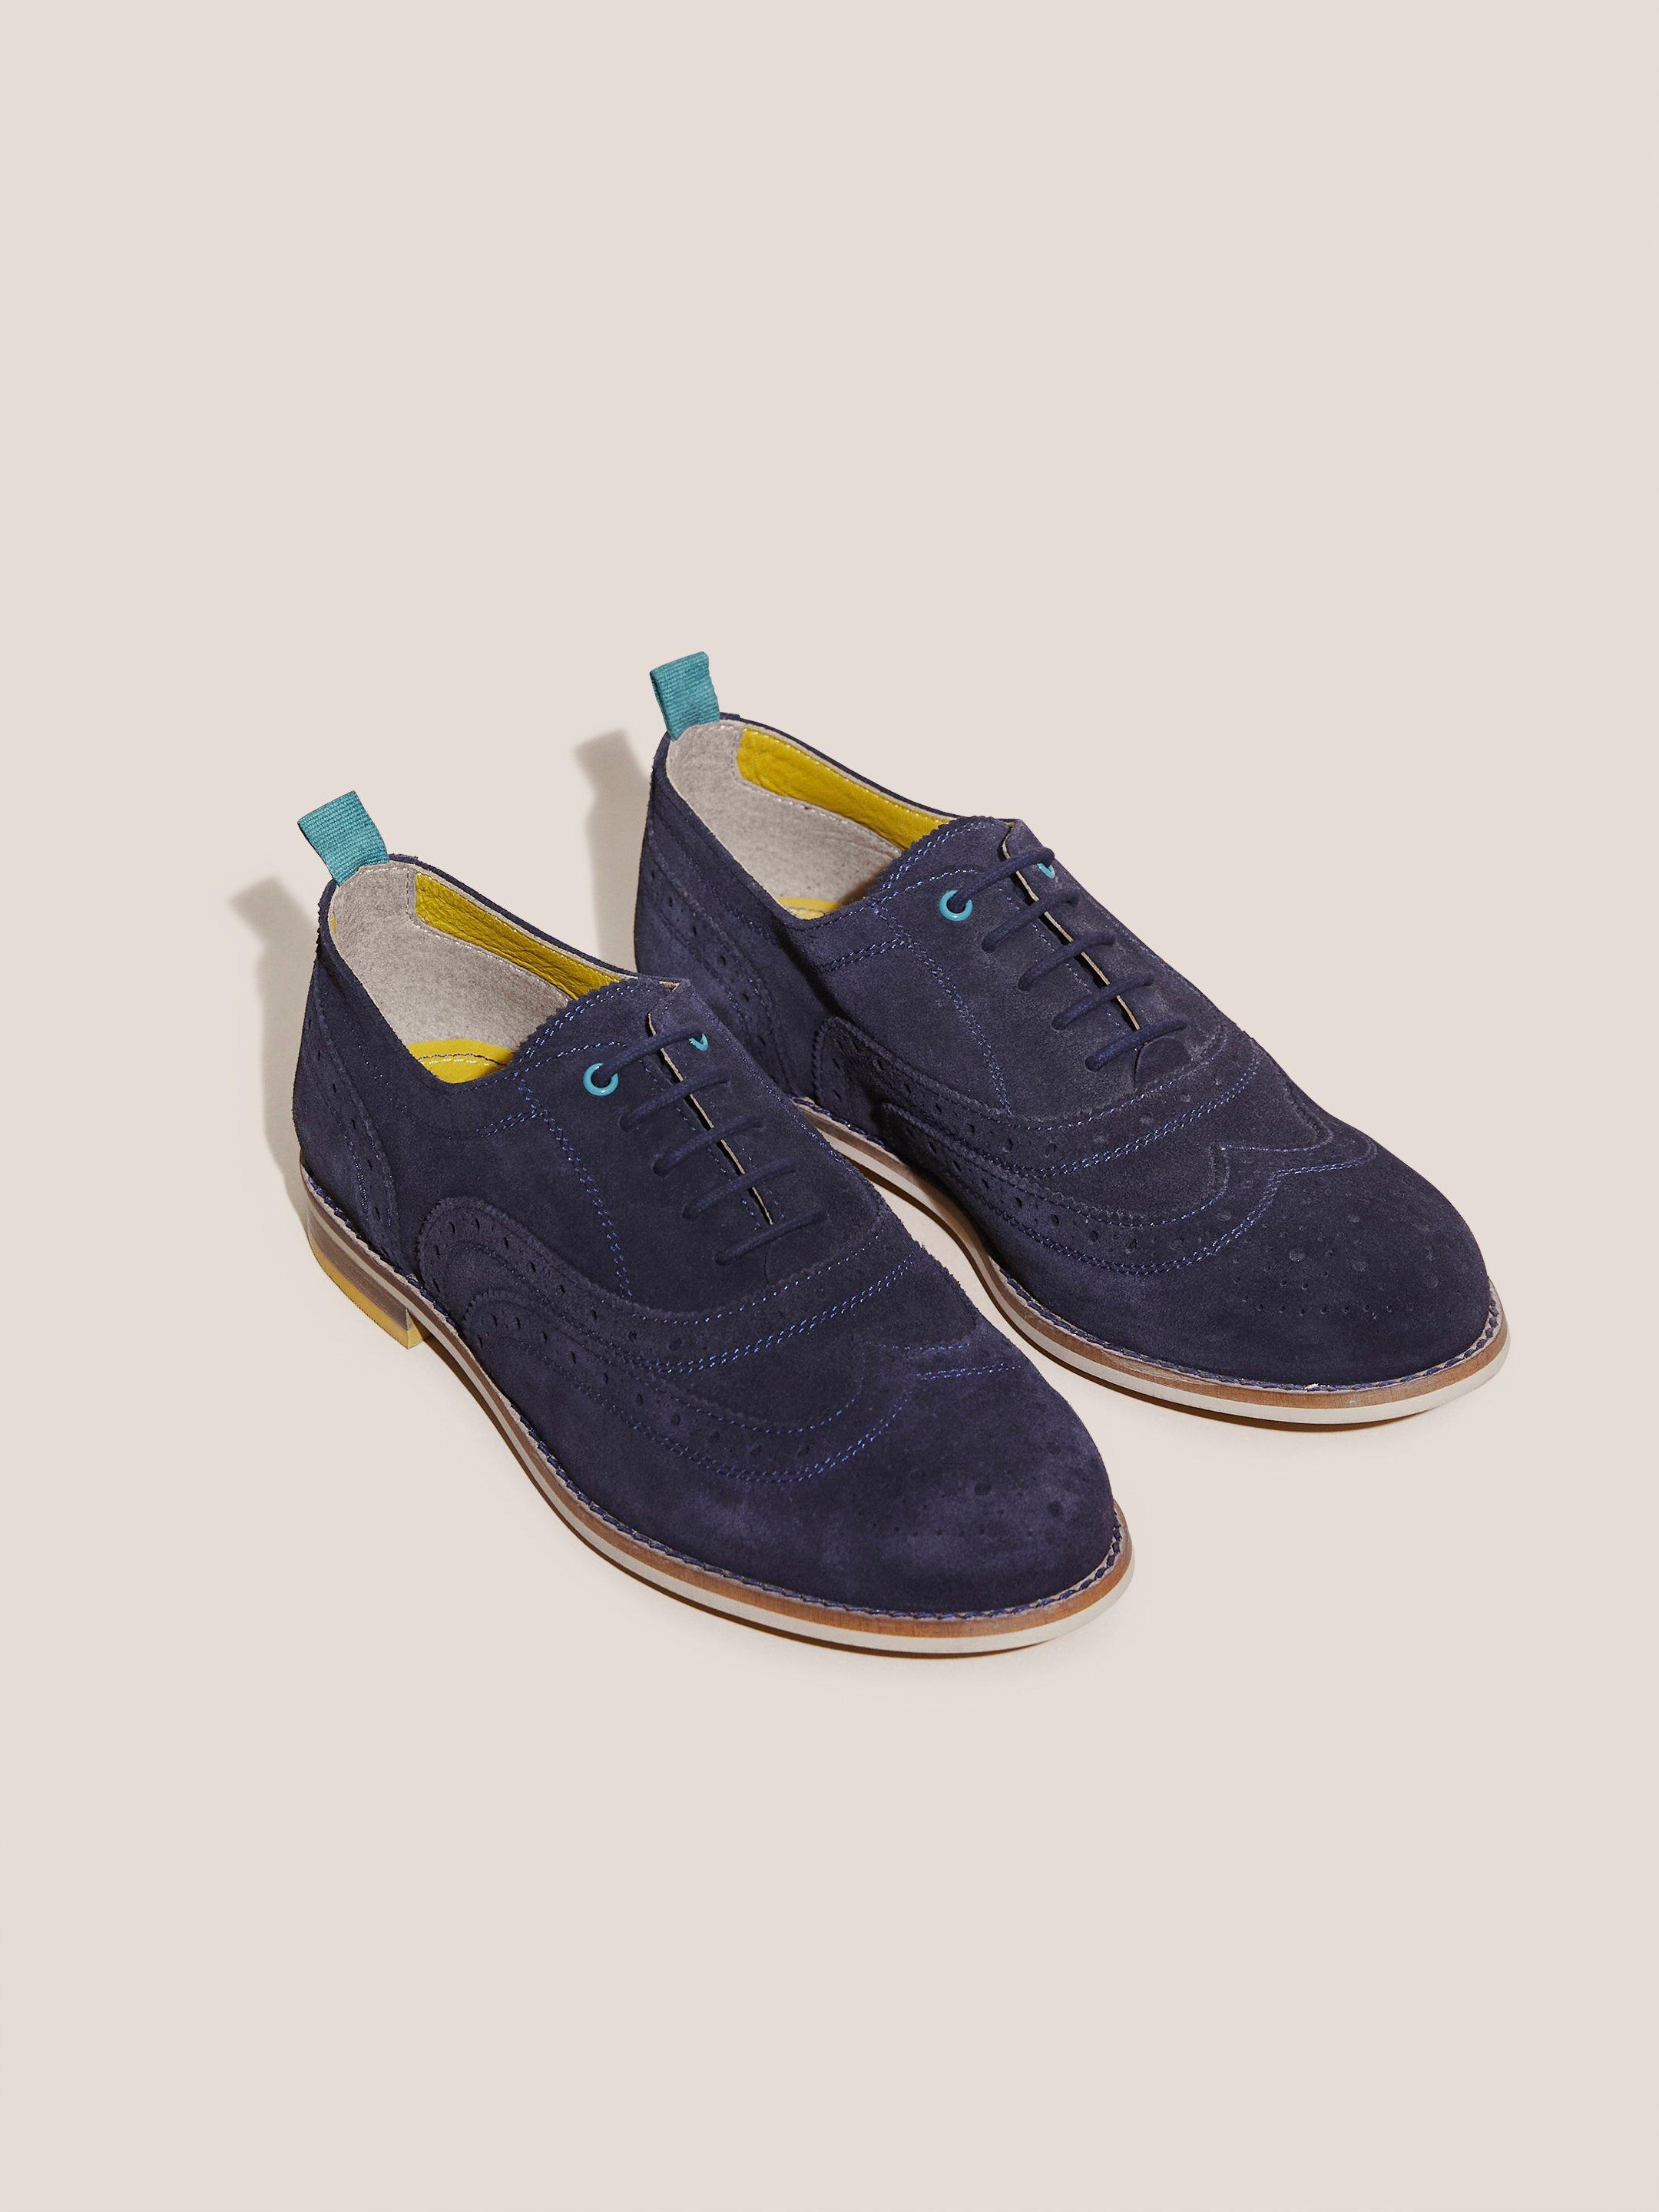 Thistle Lace Up Brogue in NAVY MULTI - FLAT FRONT